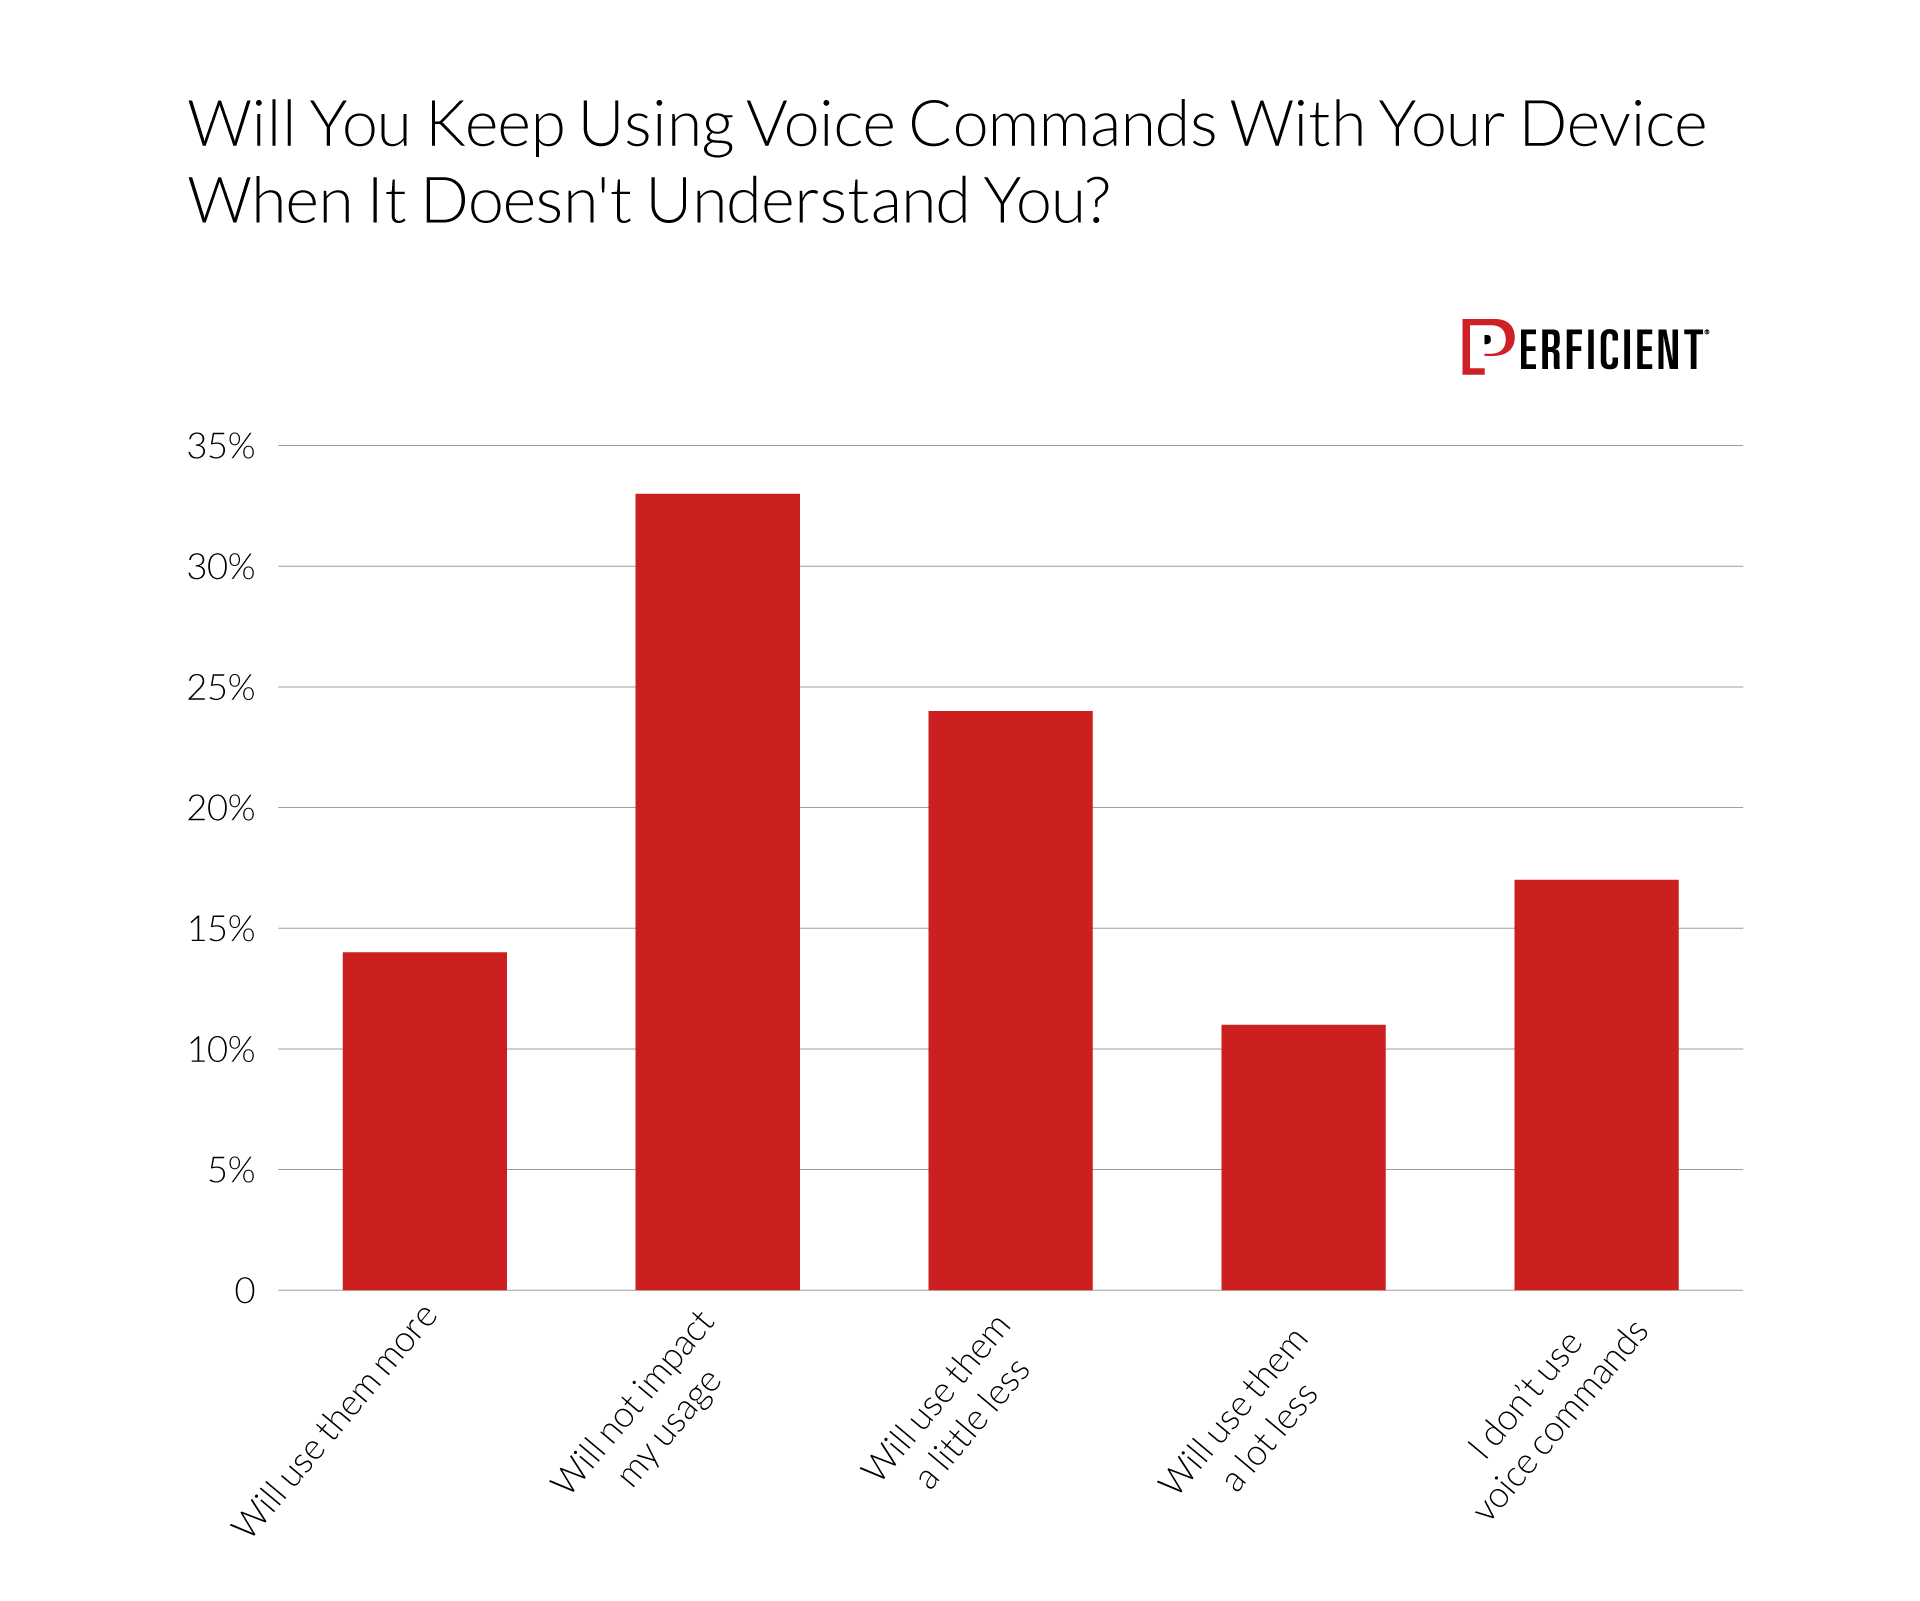 Chart shows whether or not users would use their devices less if the devices not understanding them